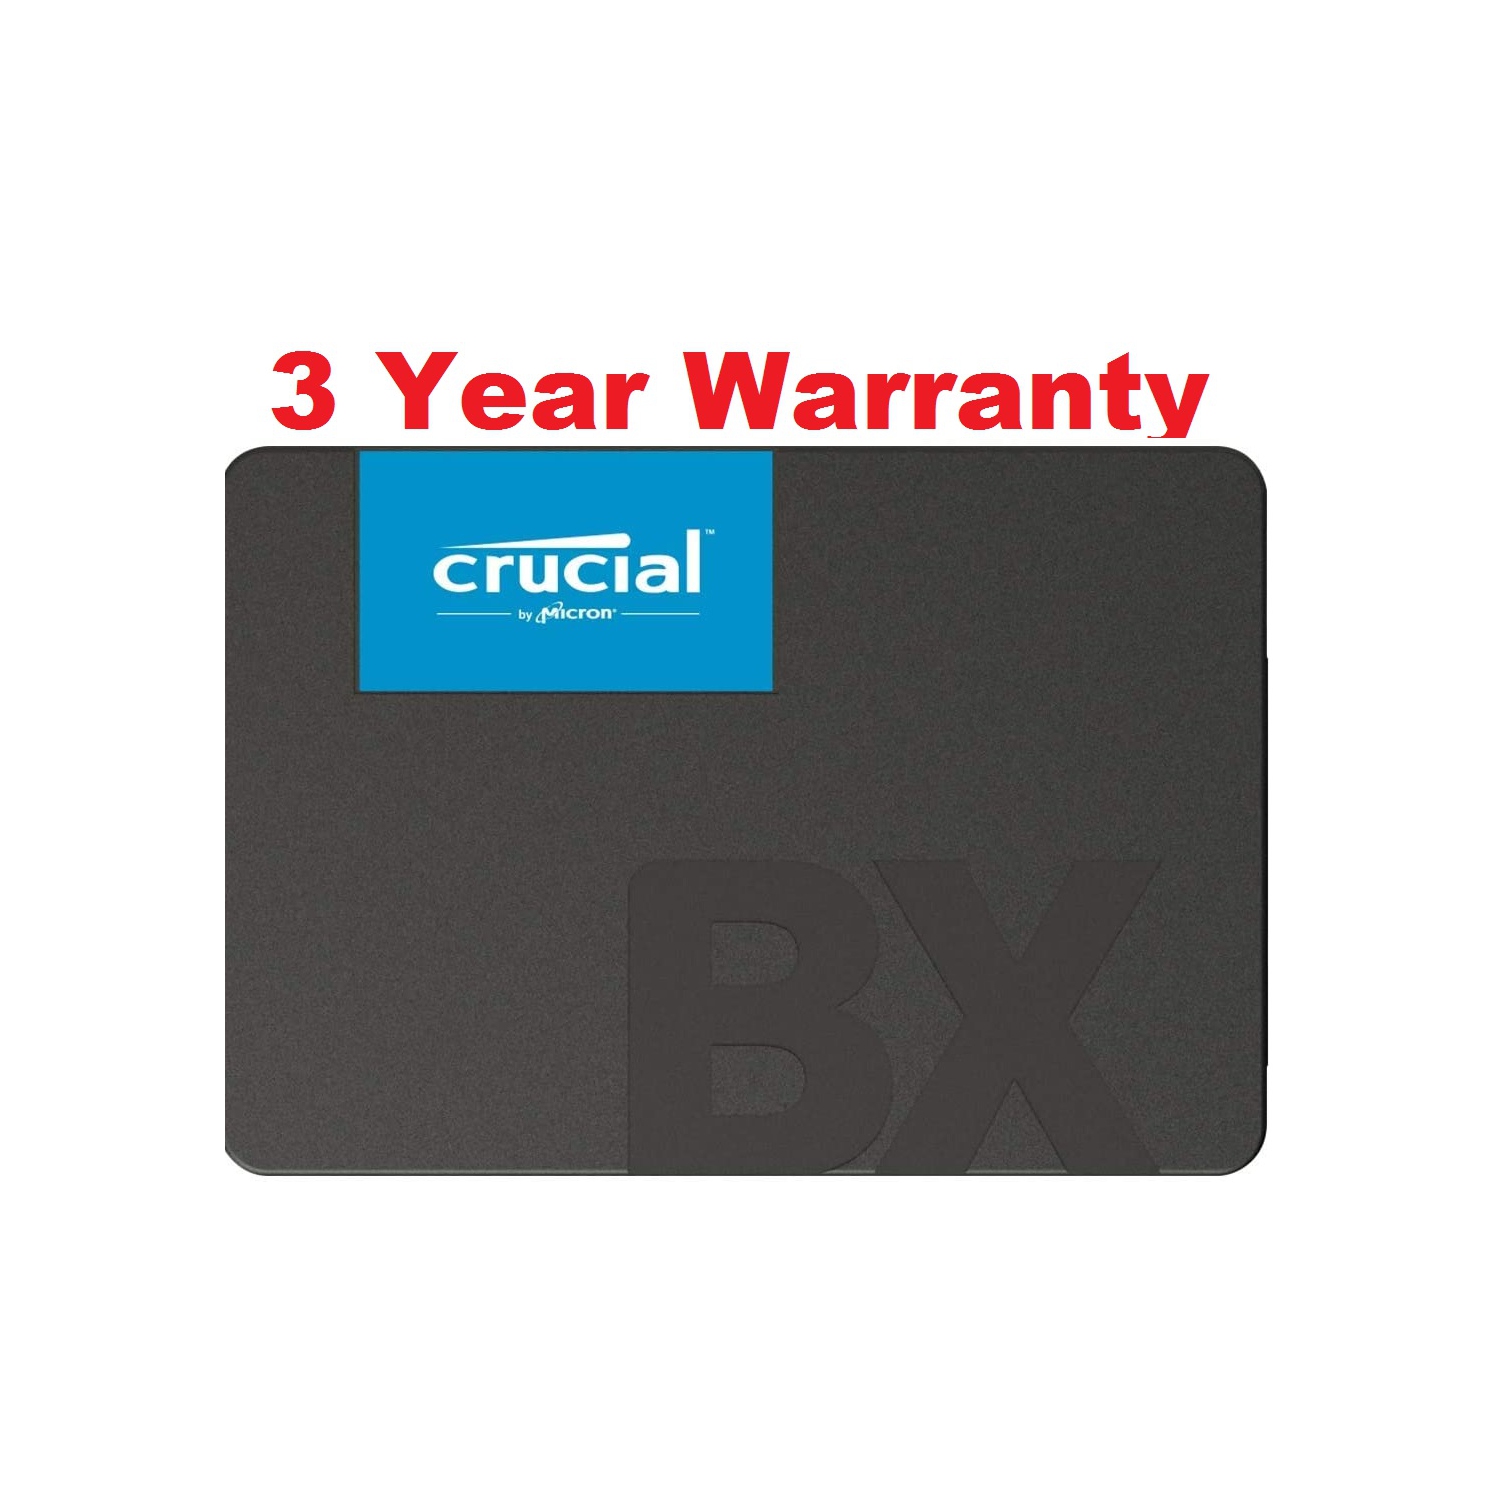 Crucial BX500 2TB 3D NAND SATA 2.5-Inch Internal SSD, up to 540MB/s for Mac and Windows. Free SSD . Free SSD Monitoring Software. ** 3 Year Warranty